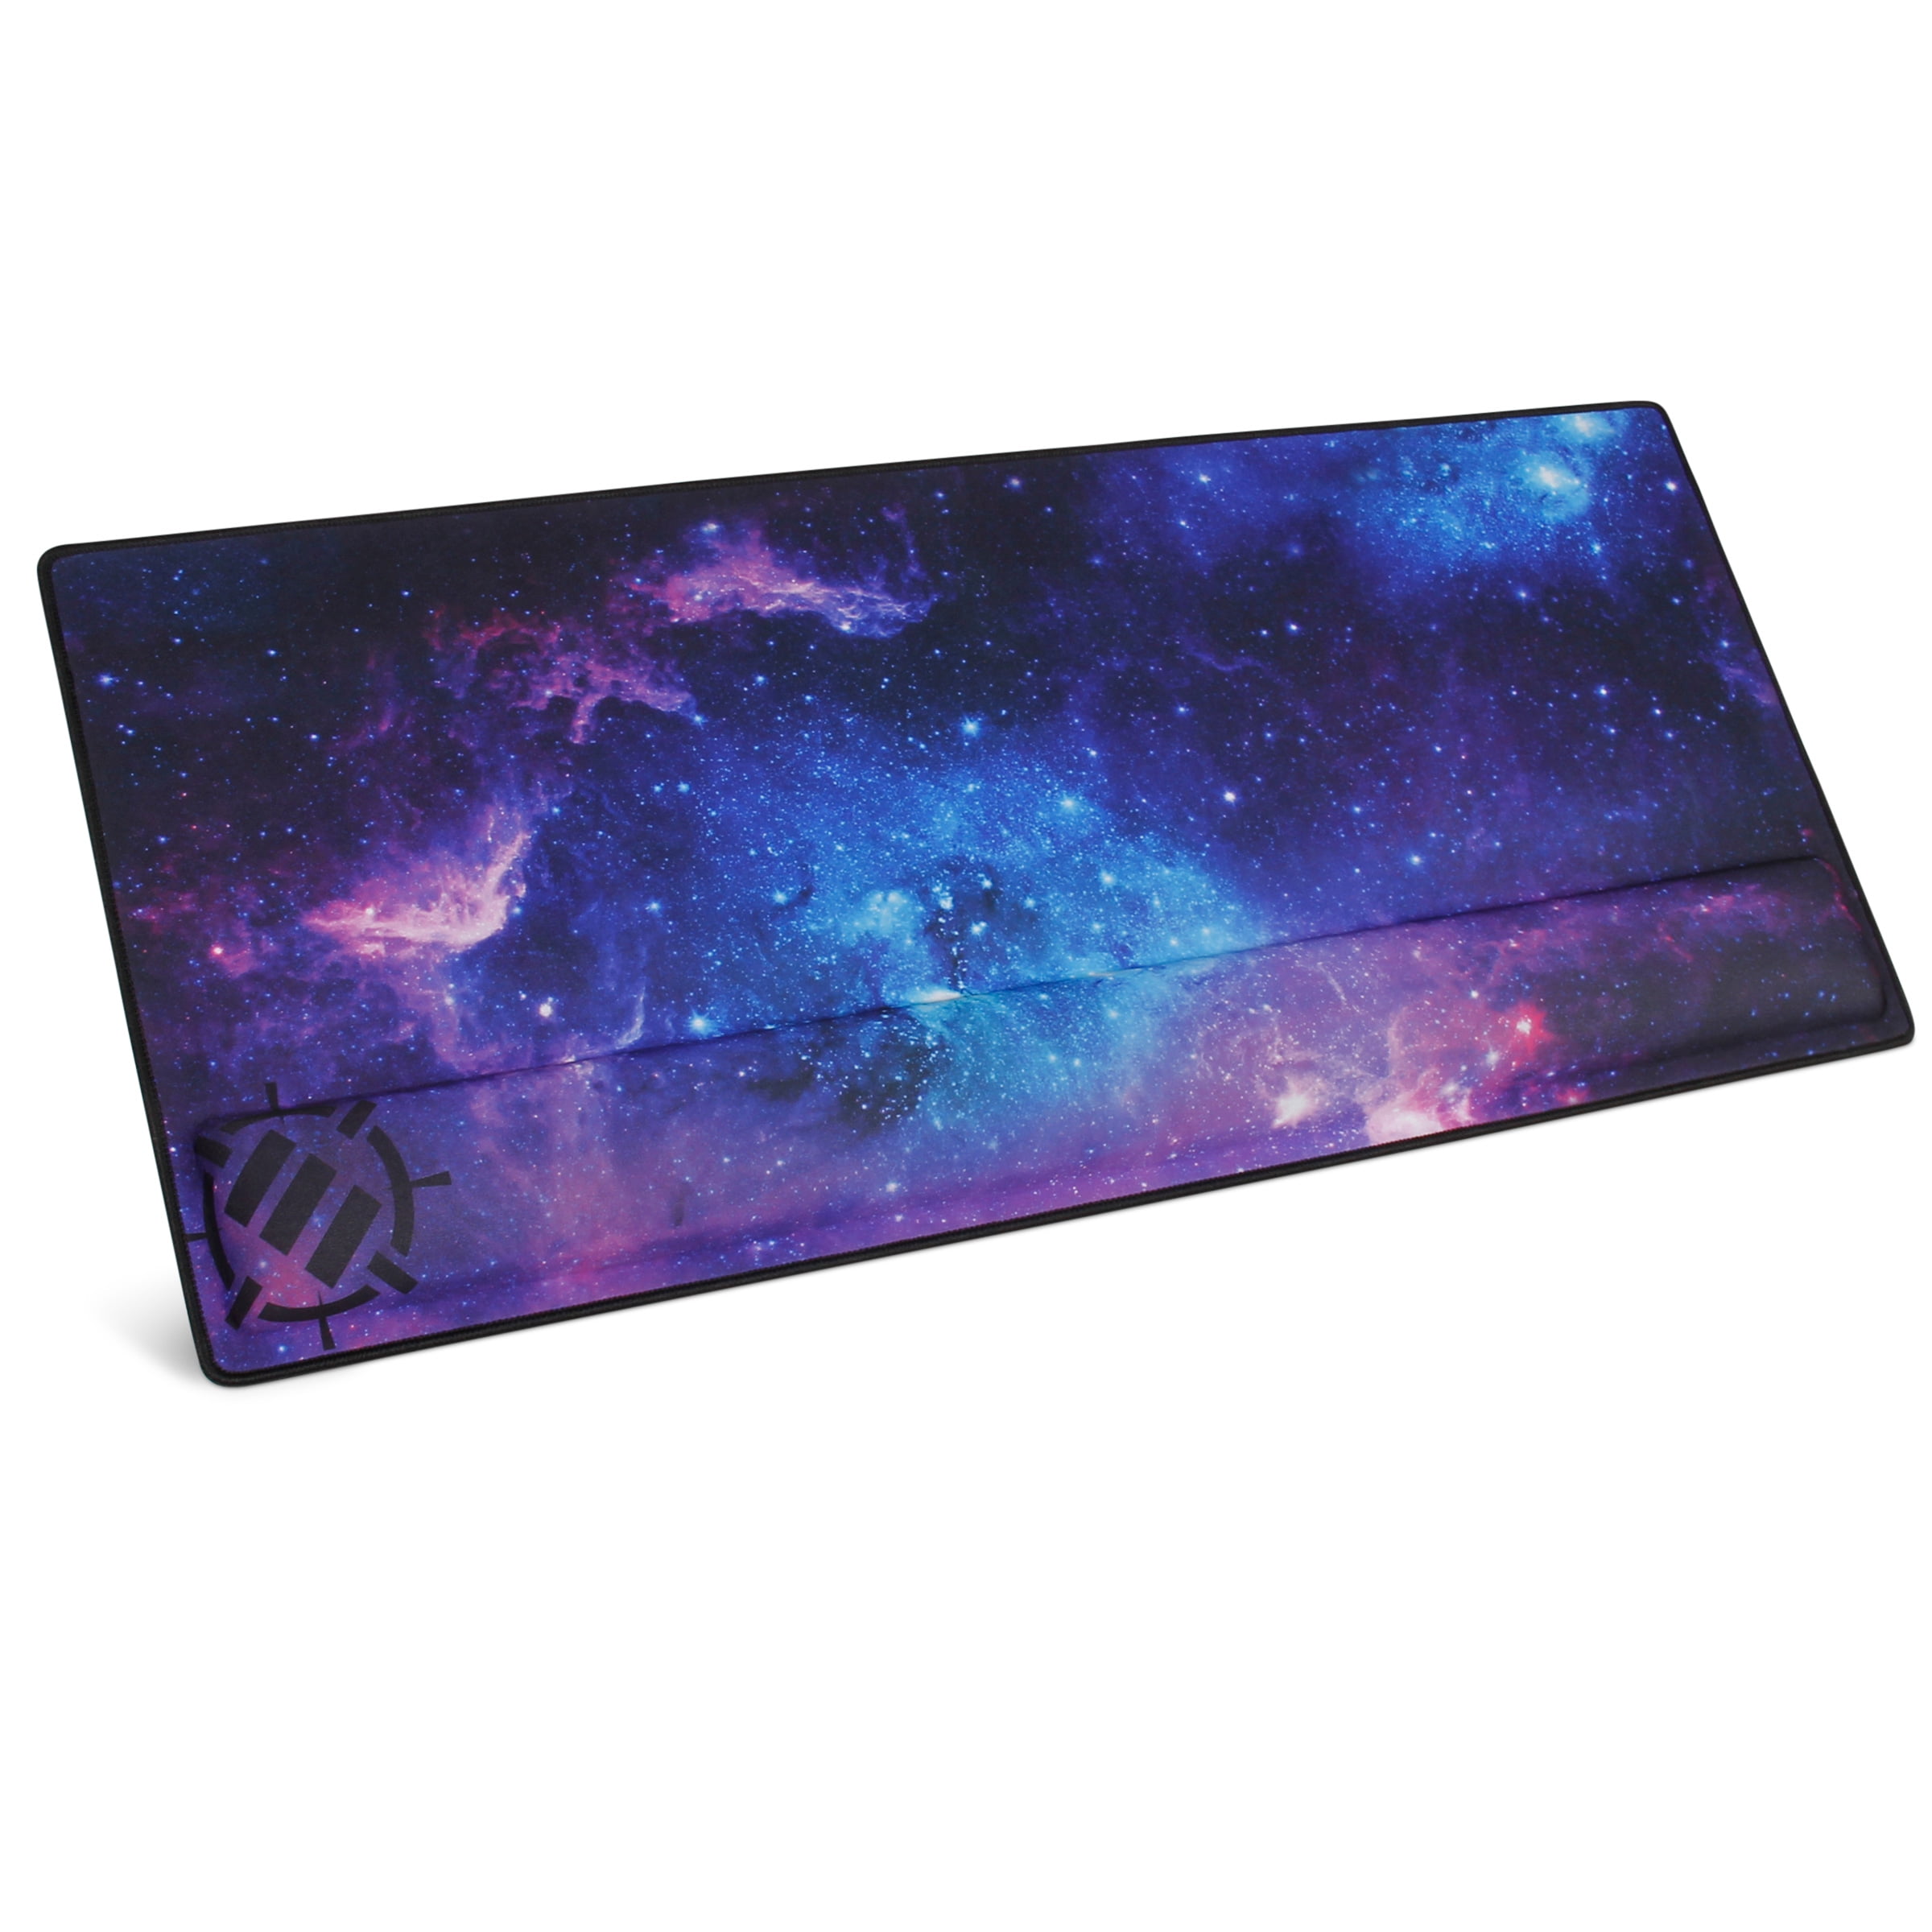 Custom 13in x 11in Large Mouse Pad – Your Playmat